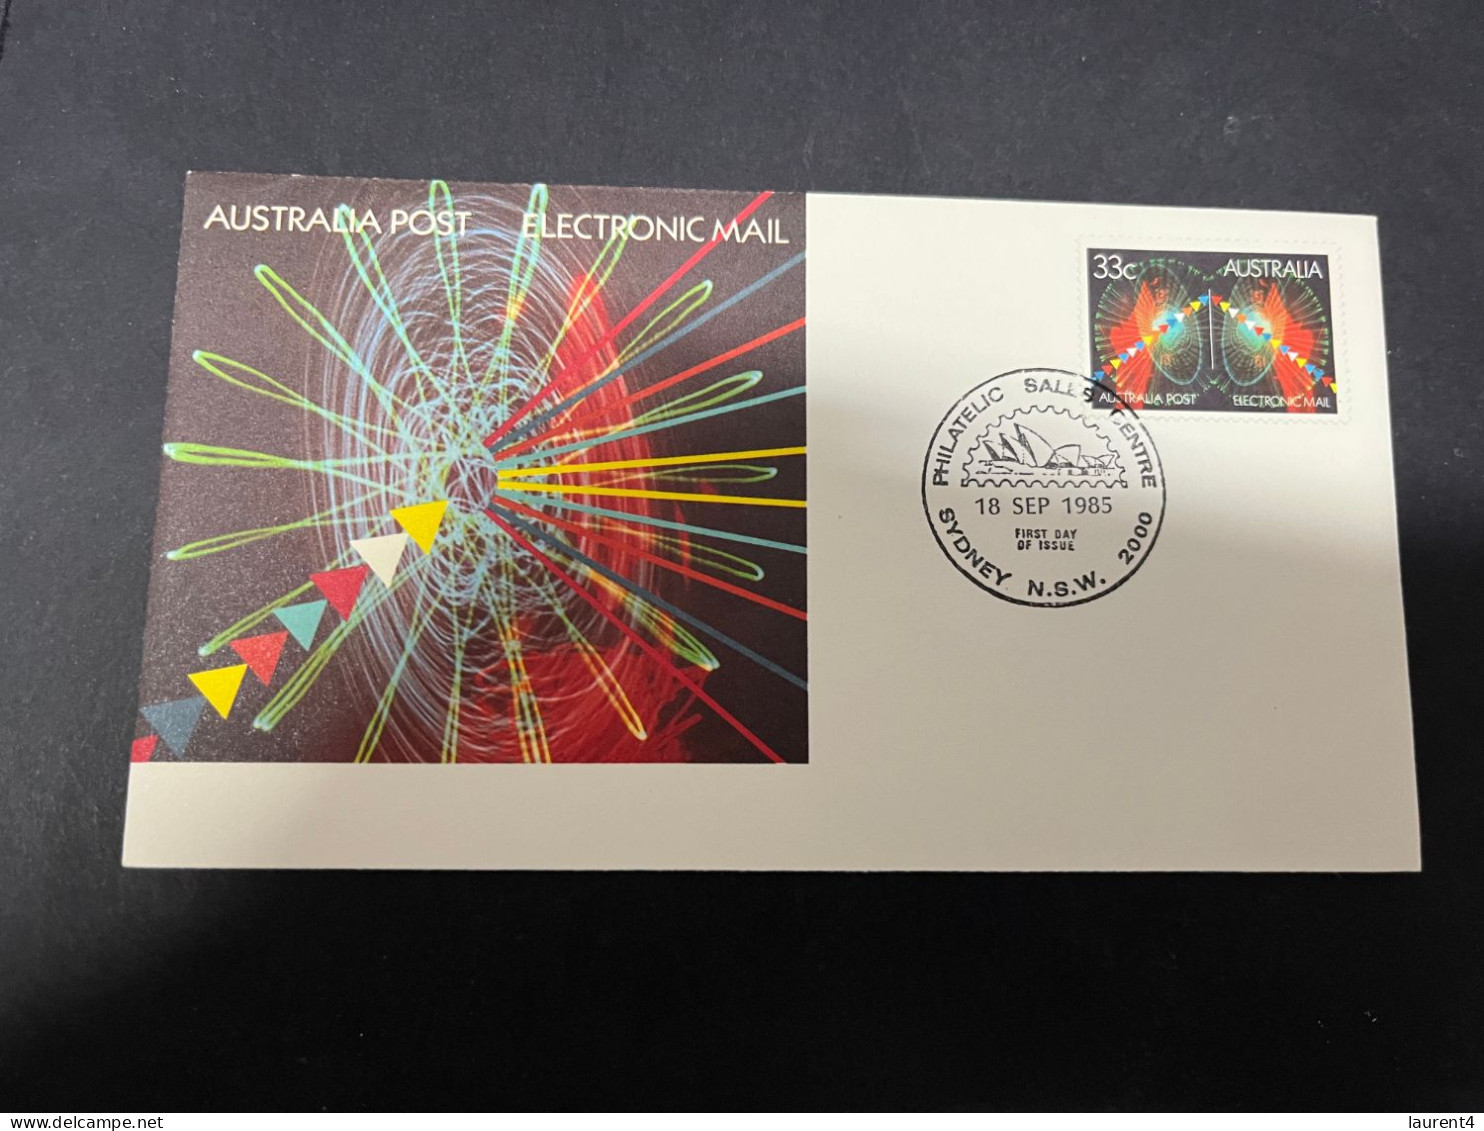 26-3-2024 (4 Y 9) Australia (2 With With Different Postmark) FDC - Electronic Mail - FDC